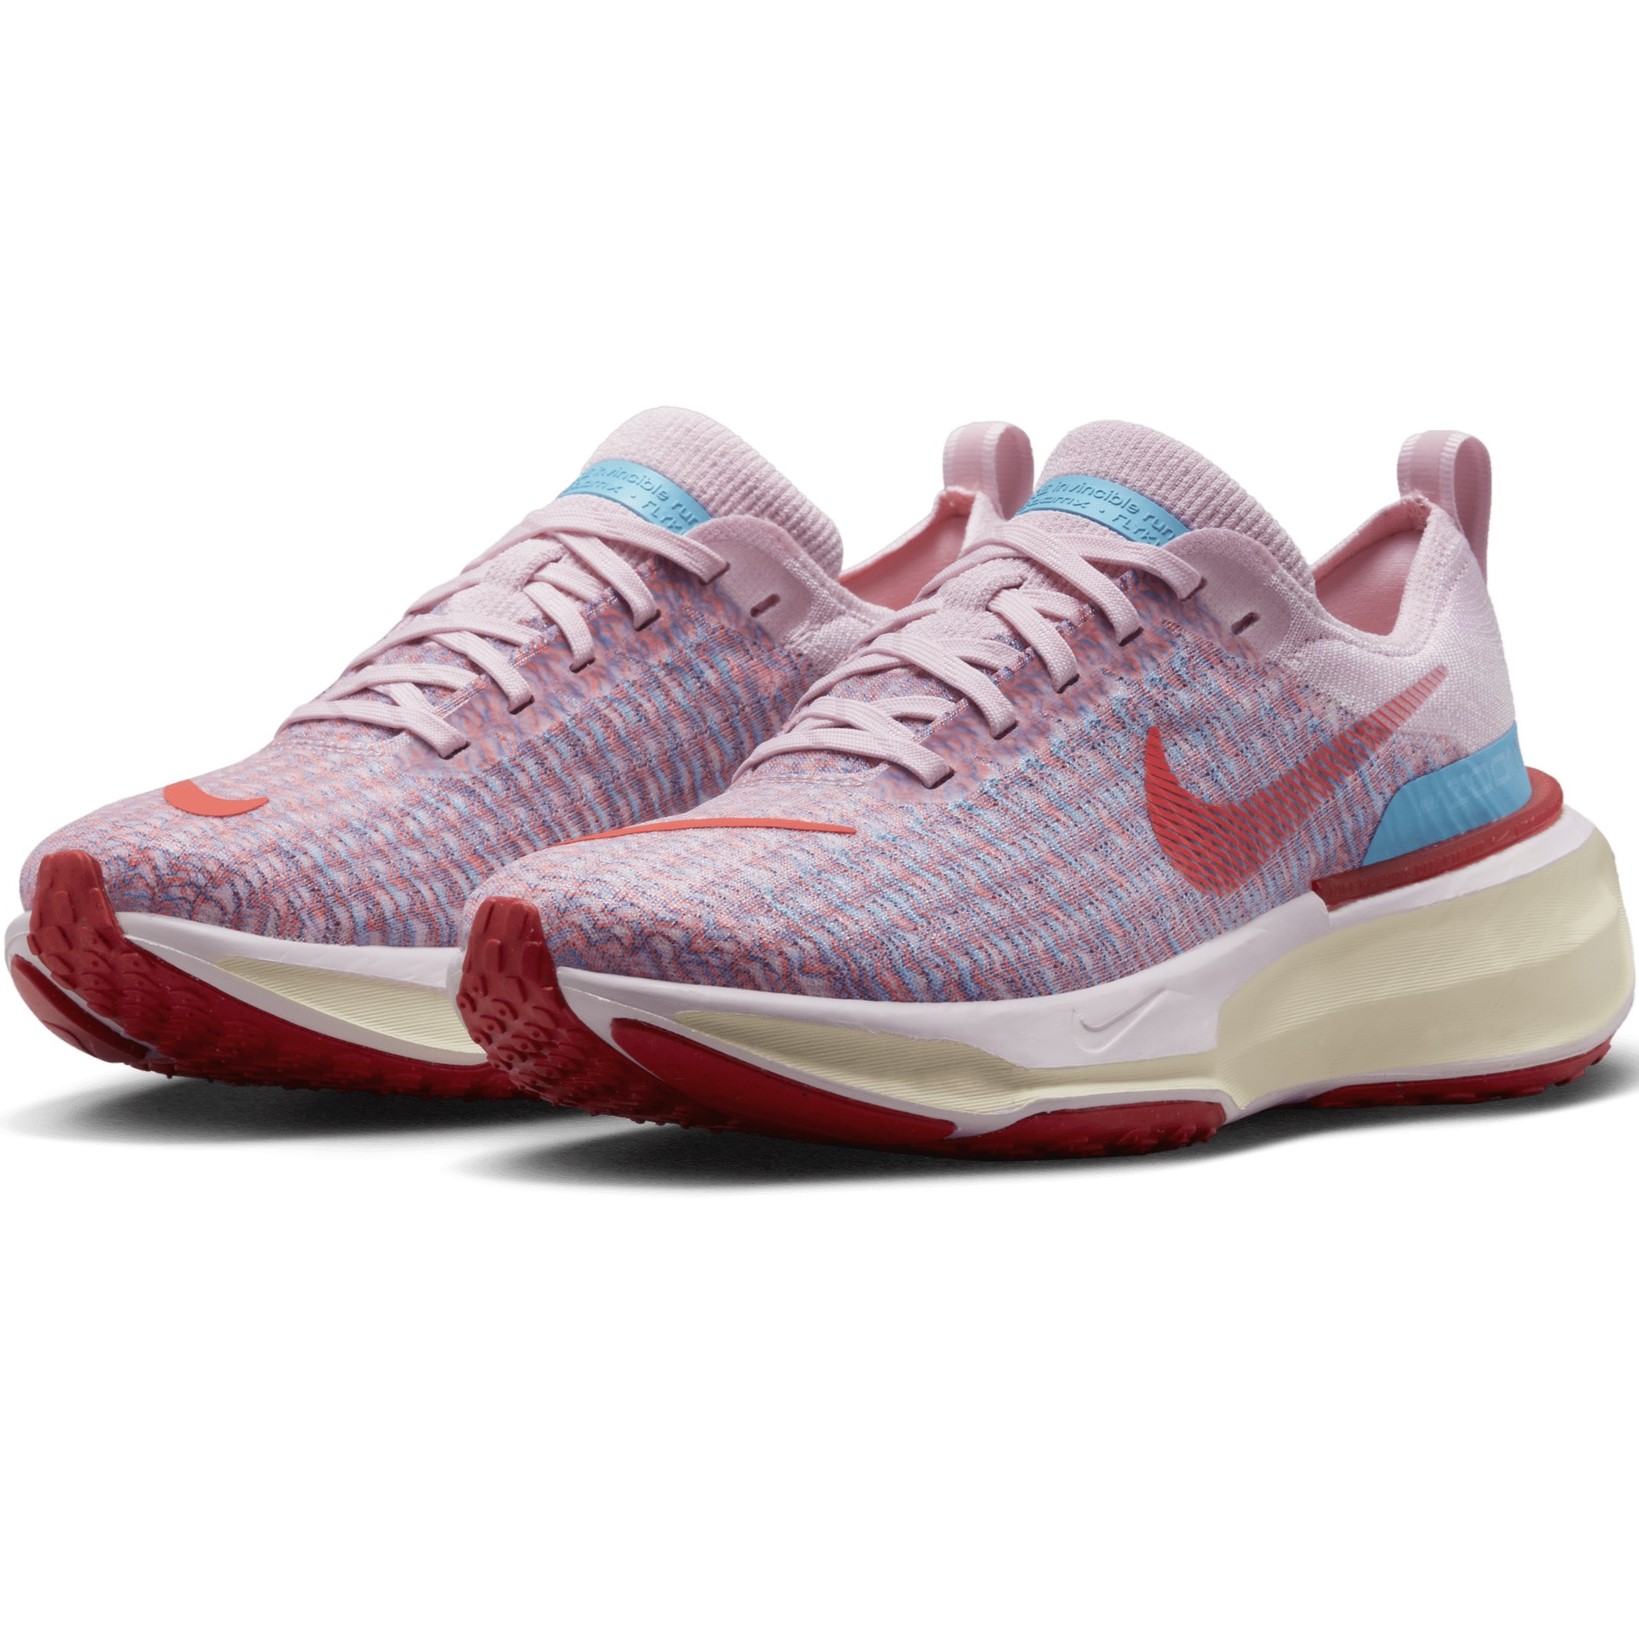 GIÀY CHẠY BỘ NIKE NỮ WOMENS ZOOMX INVINCIBLE 3 ROAD RUNNING SHOES PINK FOAM RACER BLUE DR2660-600 4